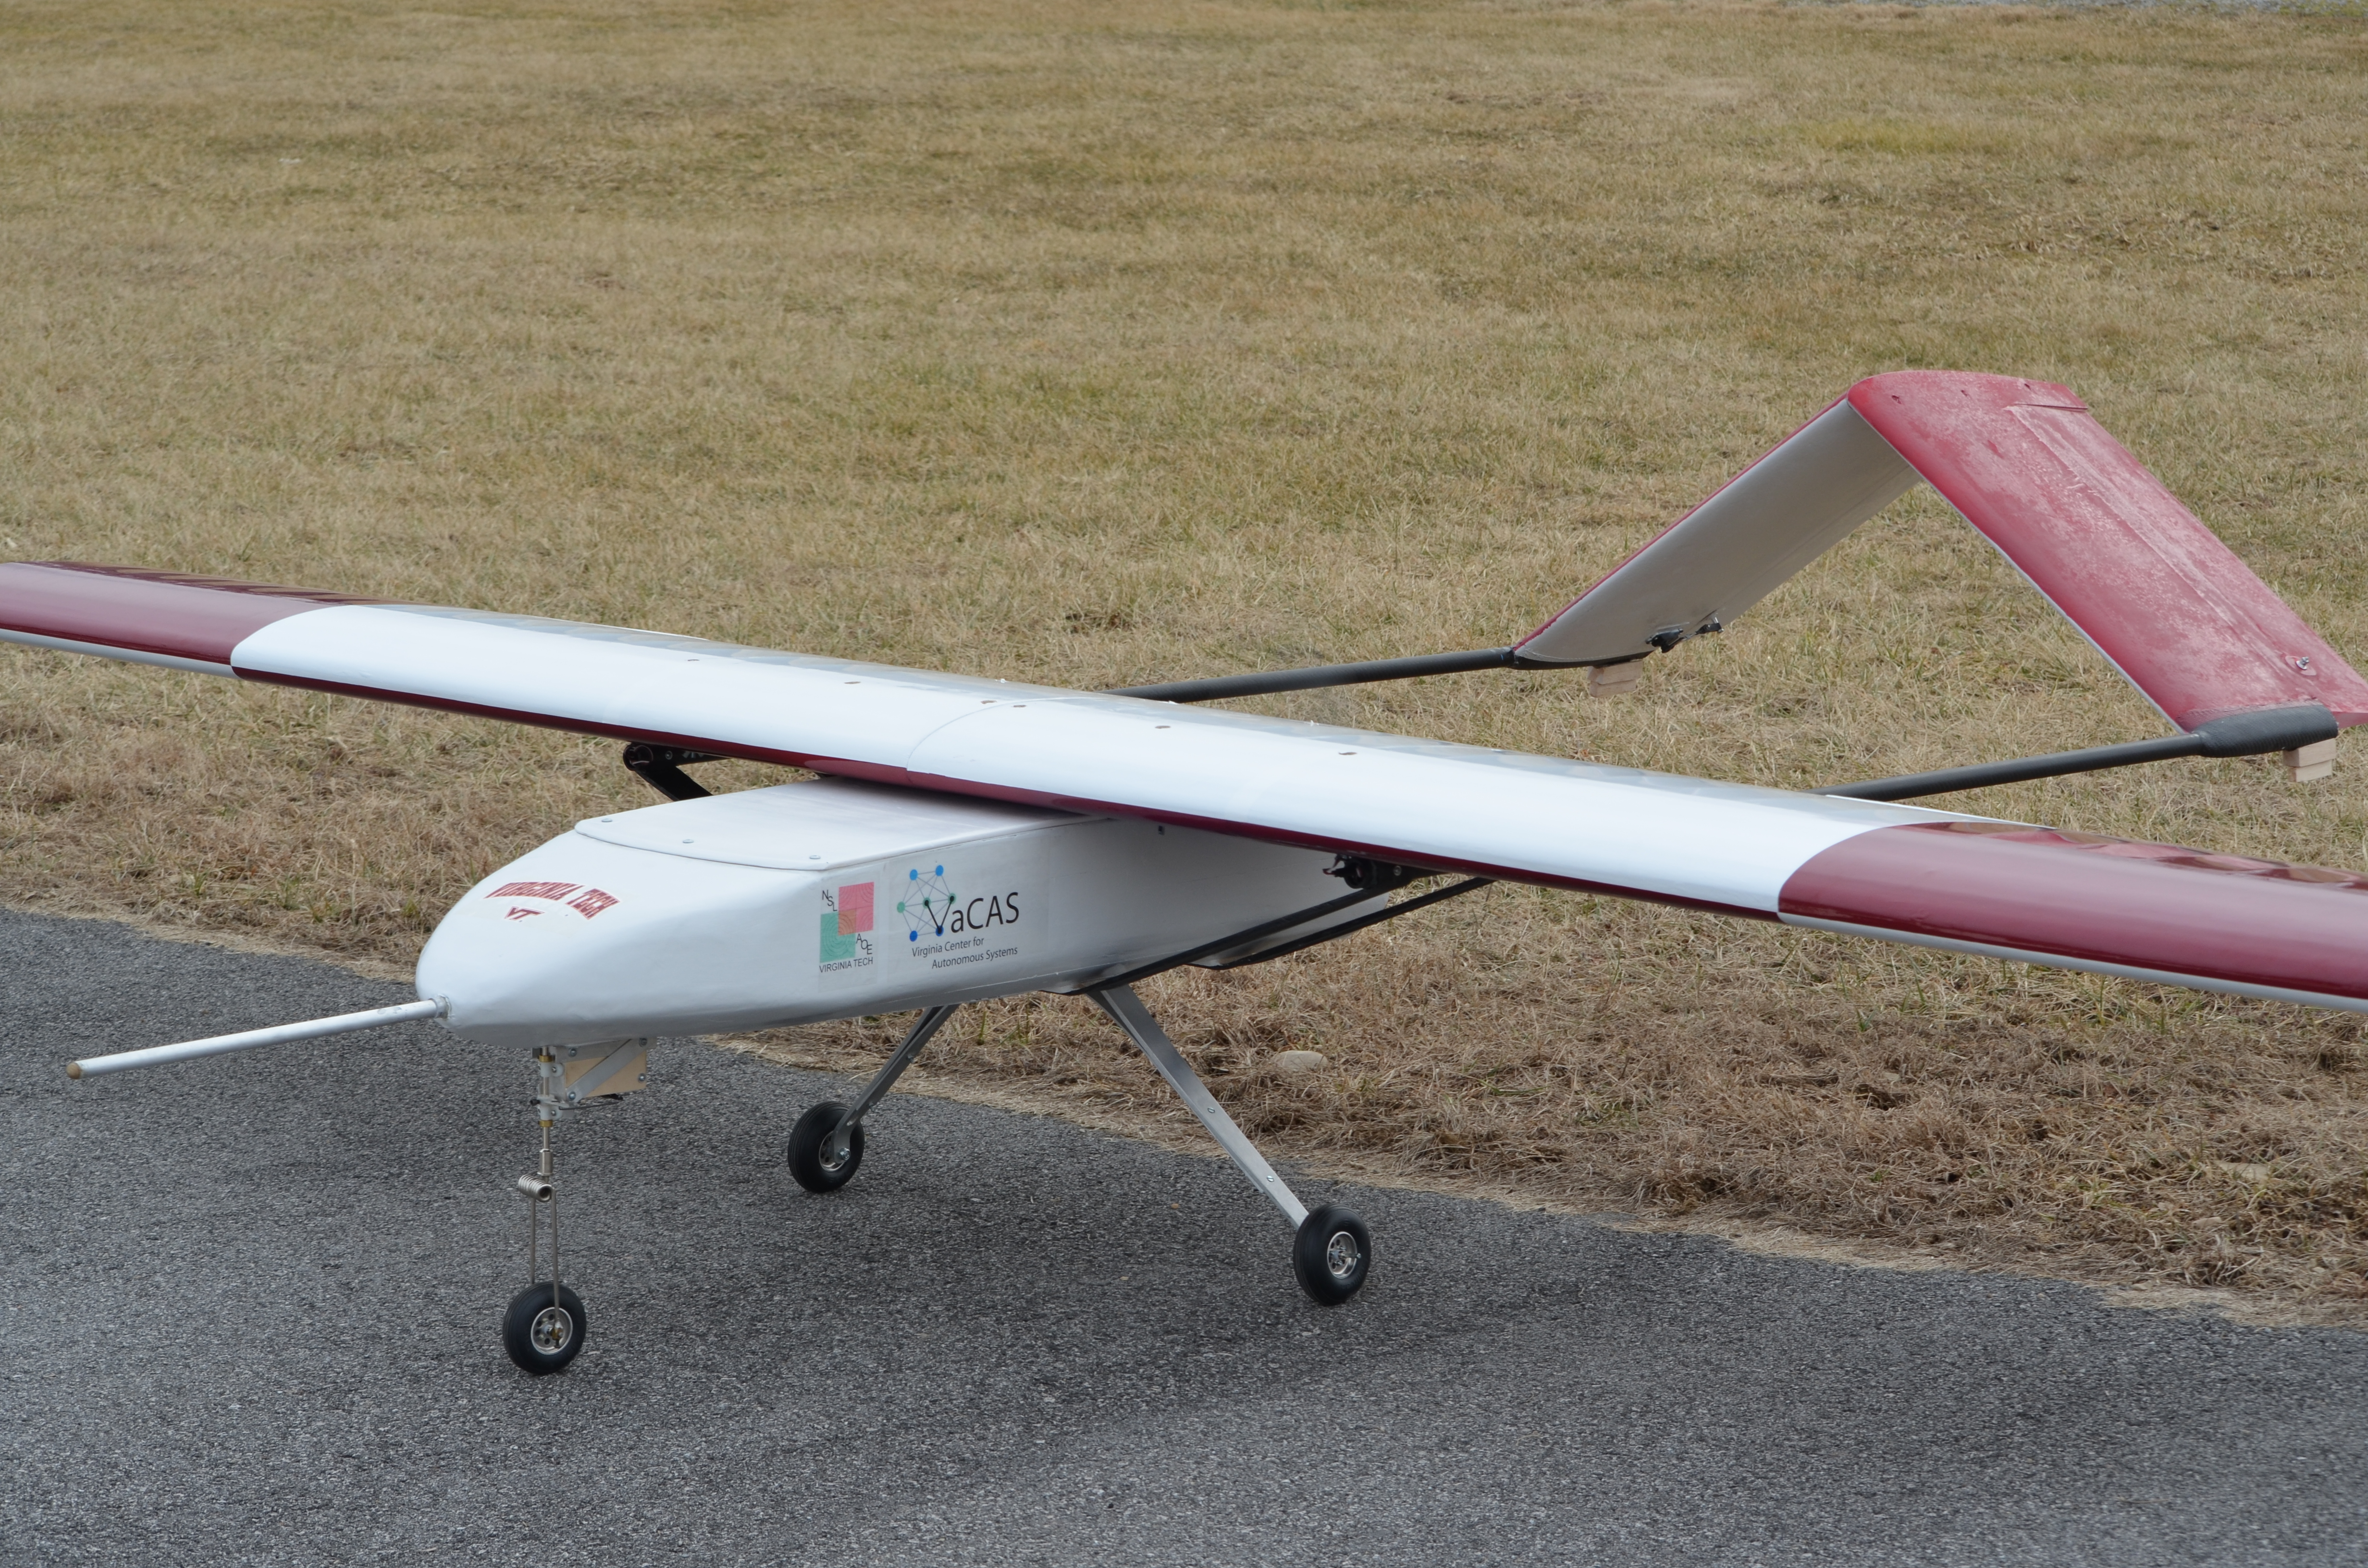 An unmanned aircraft system that is powered by electricity